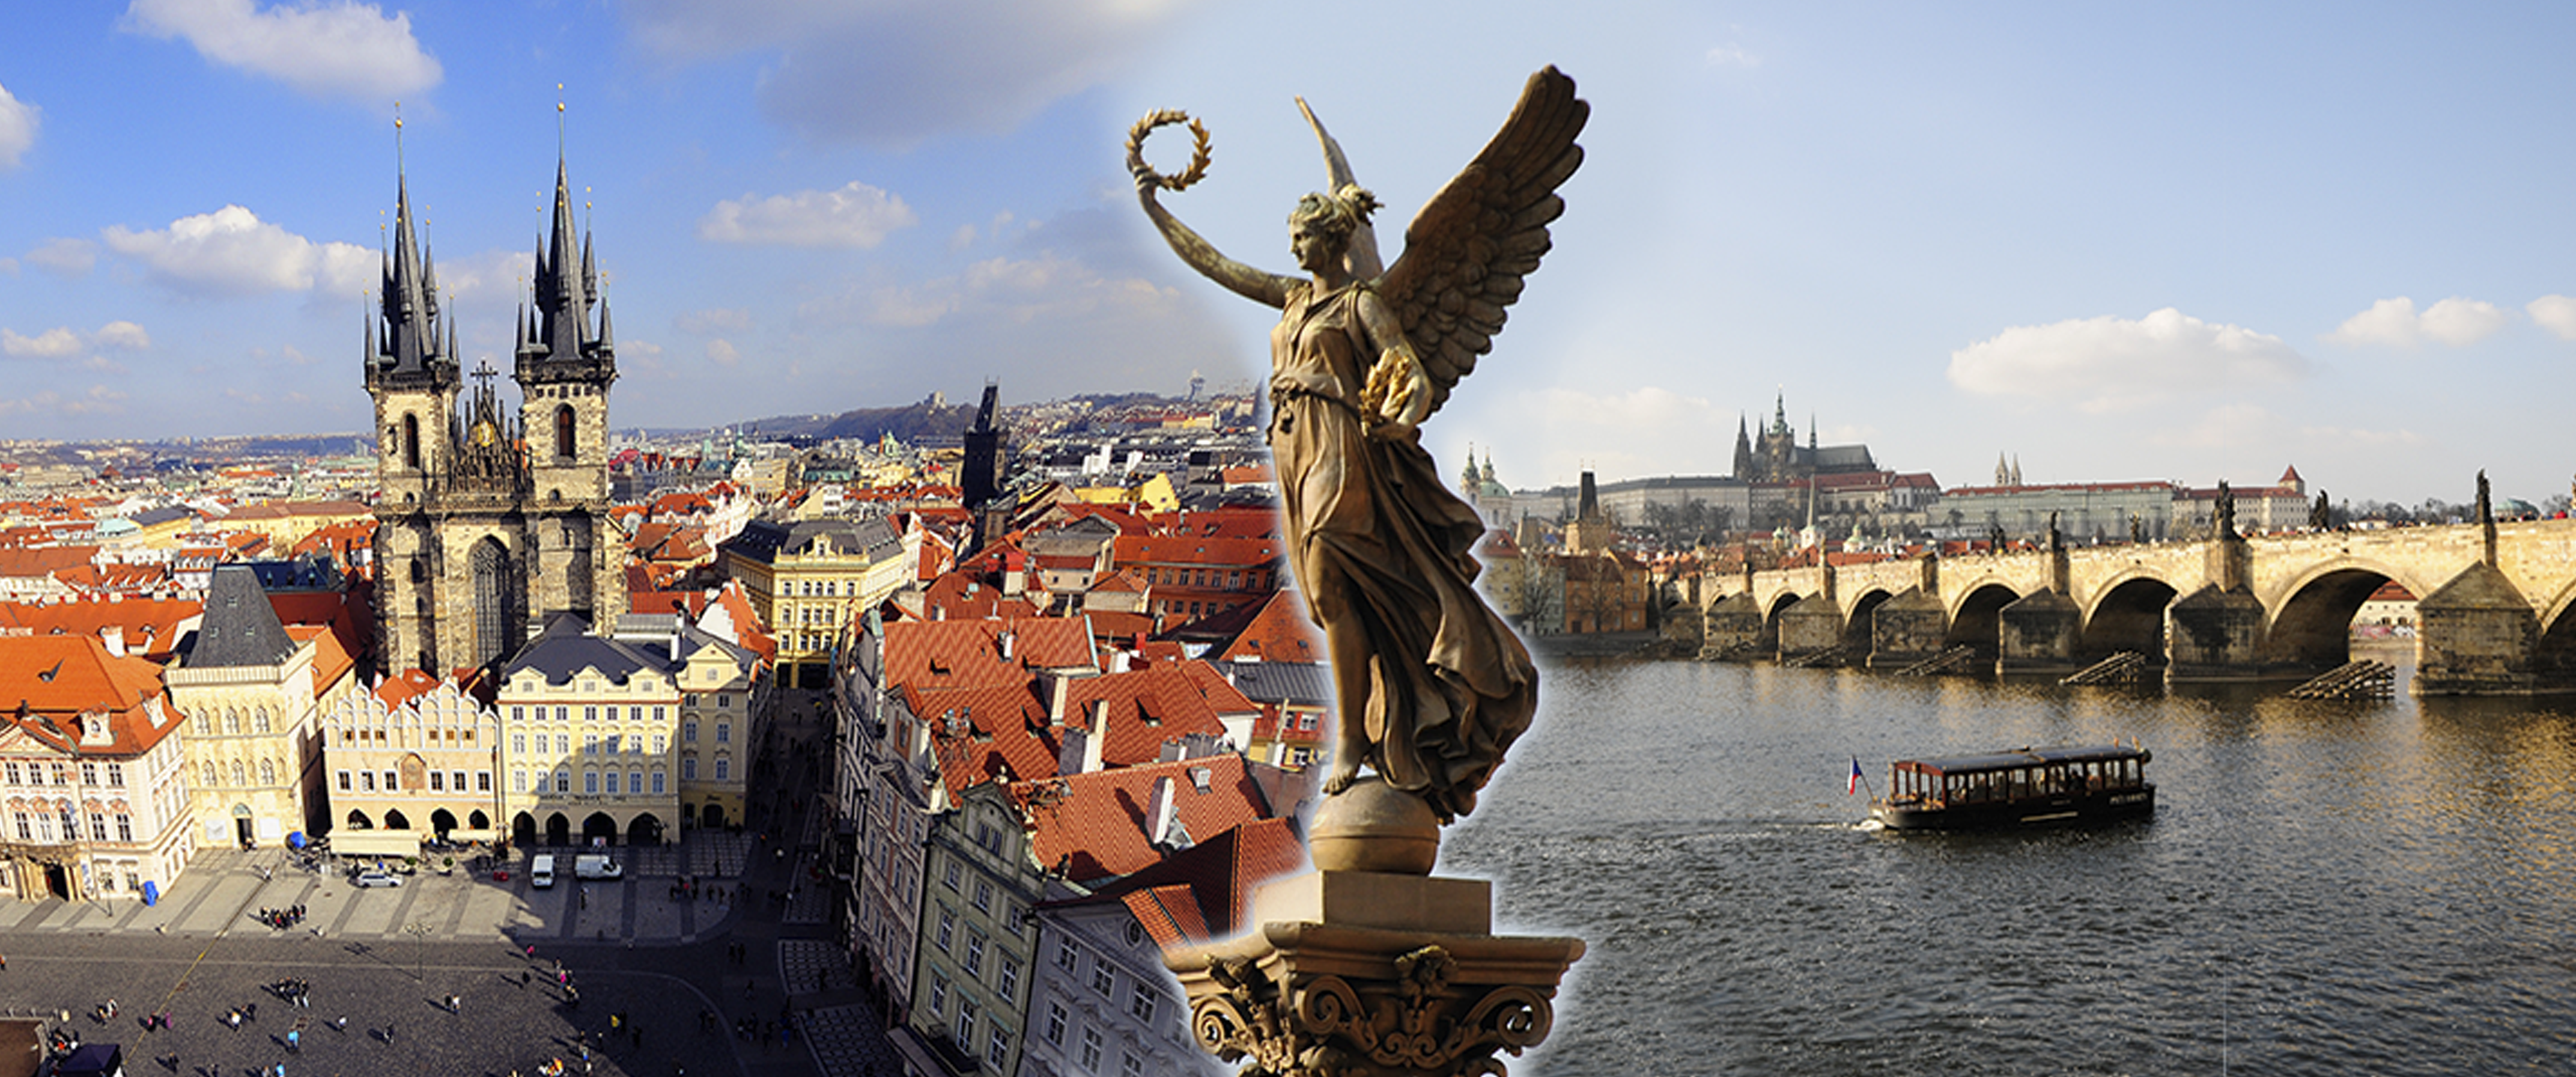 Prague Sightseeing Tours | City tours and trips